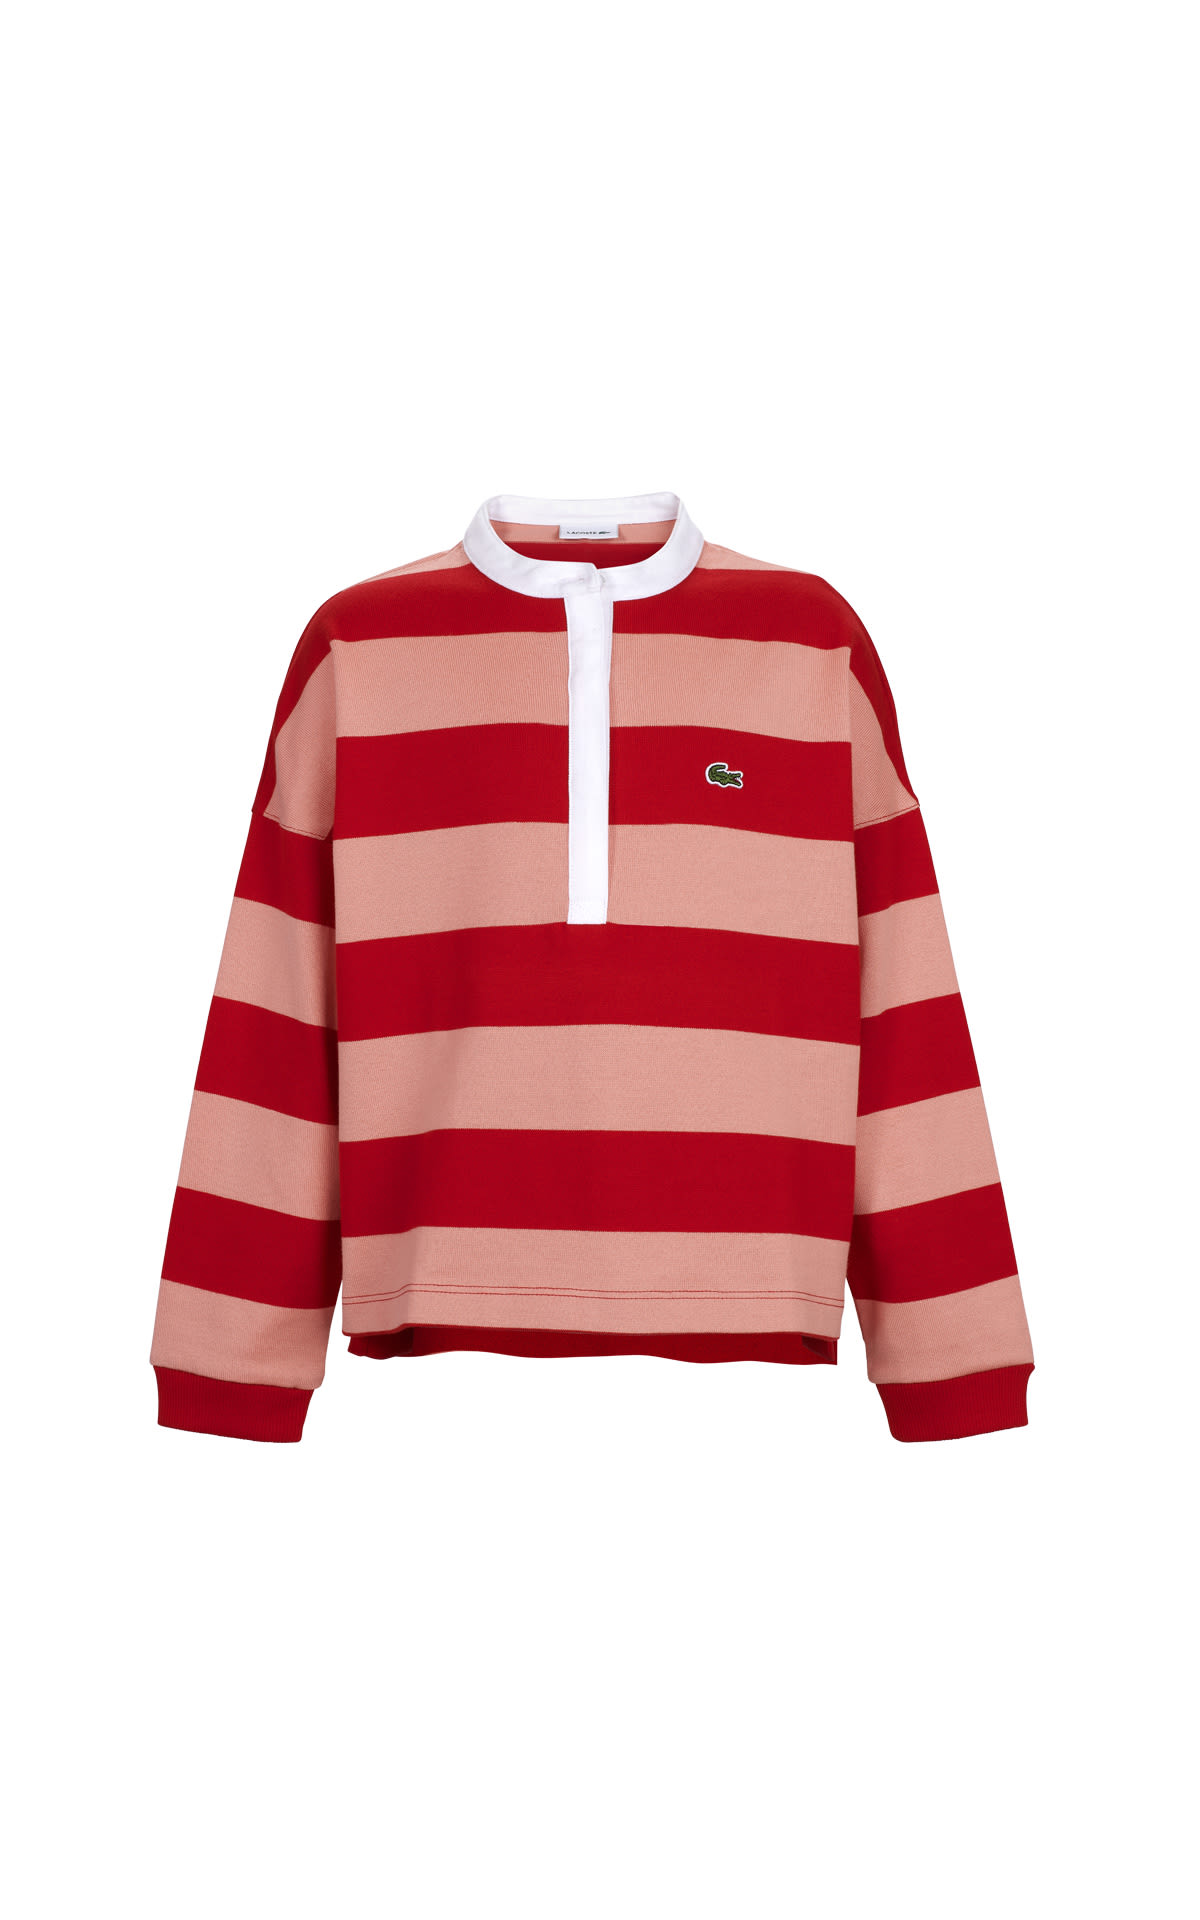 Pink and red striped polo shirt Lacoste